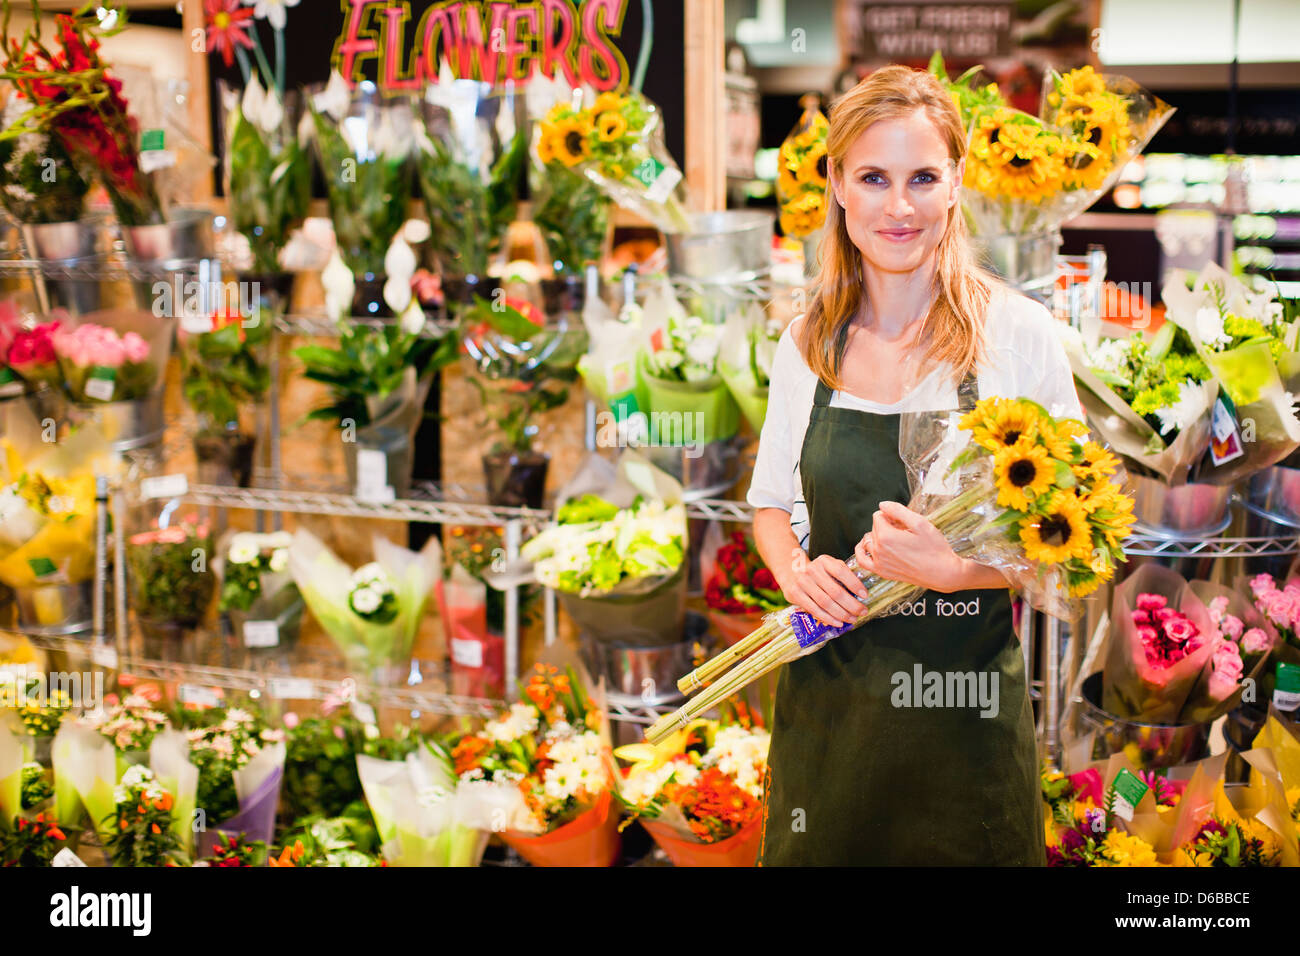 Grocer working in florist section Stock Photo